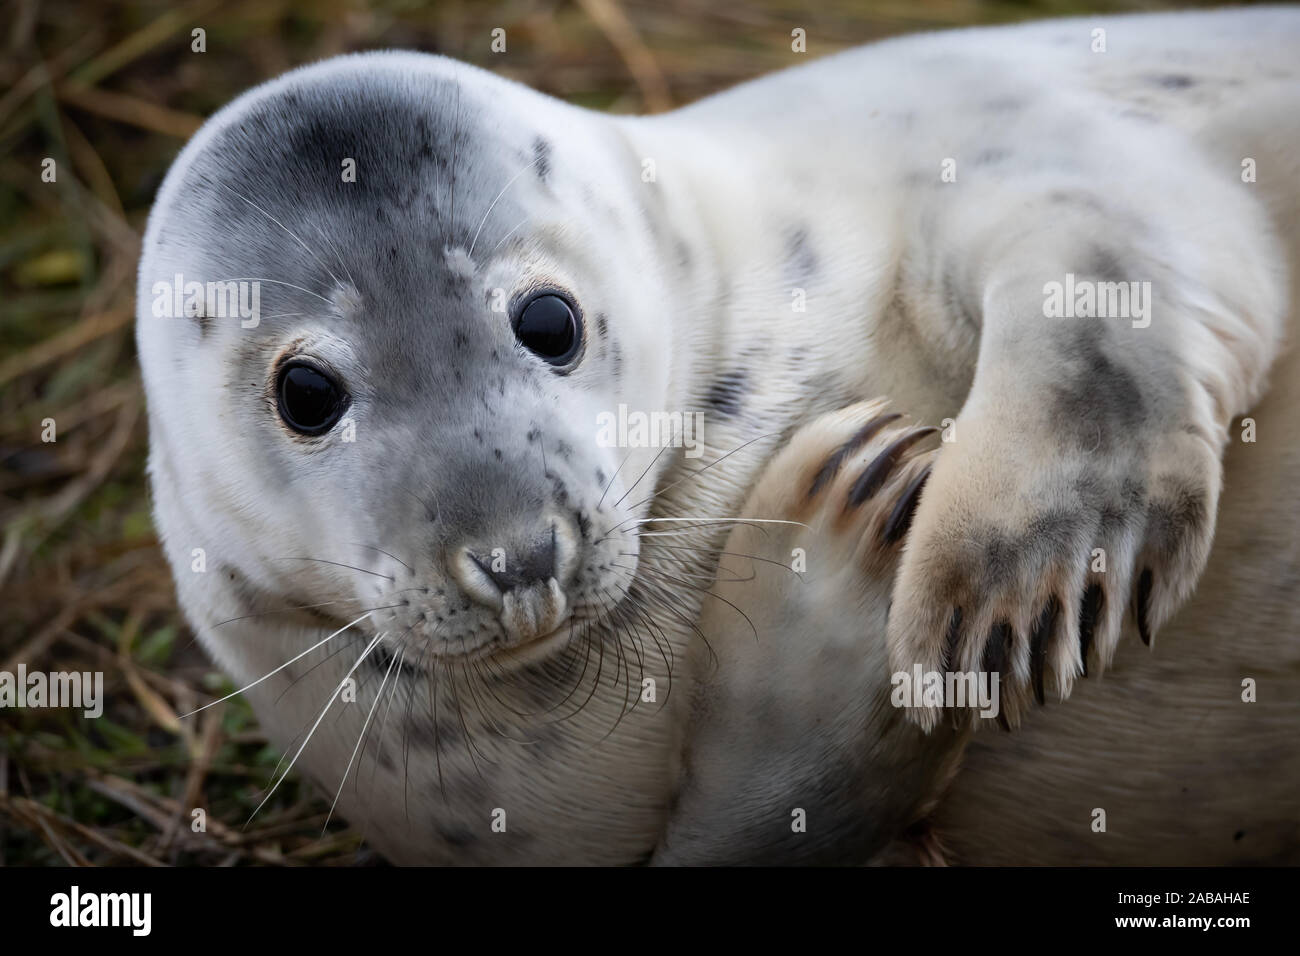 Donna Nook Nature Reserve, Lincolnshire, UK. 26th Nov, 2019. Atlantic Grey Seals (Halichoerus Gryus) come ashore for the annual birthing of their pups. Donna Nook Nature Reserve, Lincolnshire, UK. The annual spectacle takes place during November into early December each year. So far the reserve has seen 489 bulls, 1629 cows and a massive 1554 pups. Credit: Anthony Wallbank/Alamy Live News Stock Photo